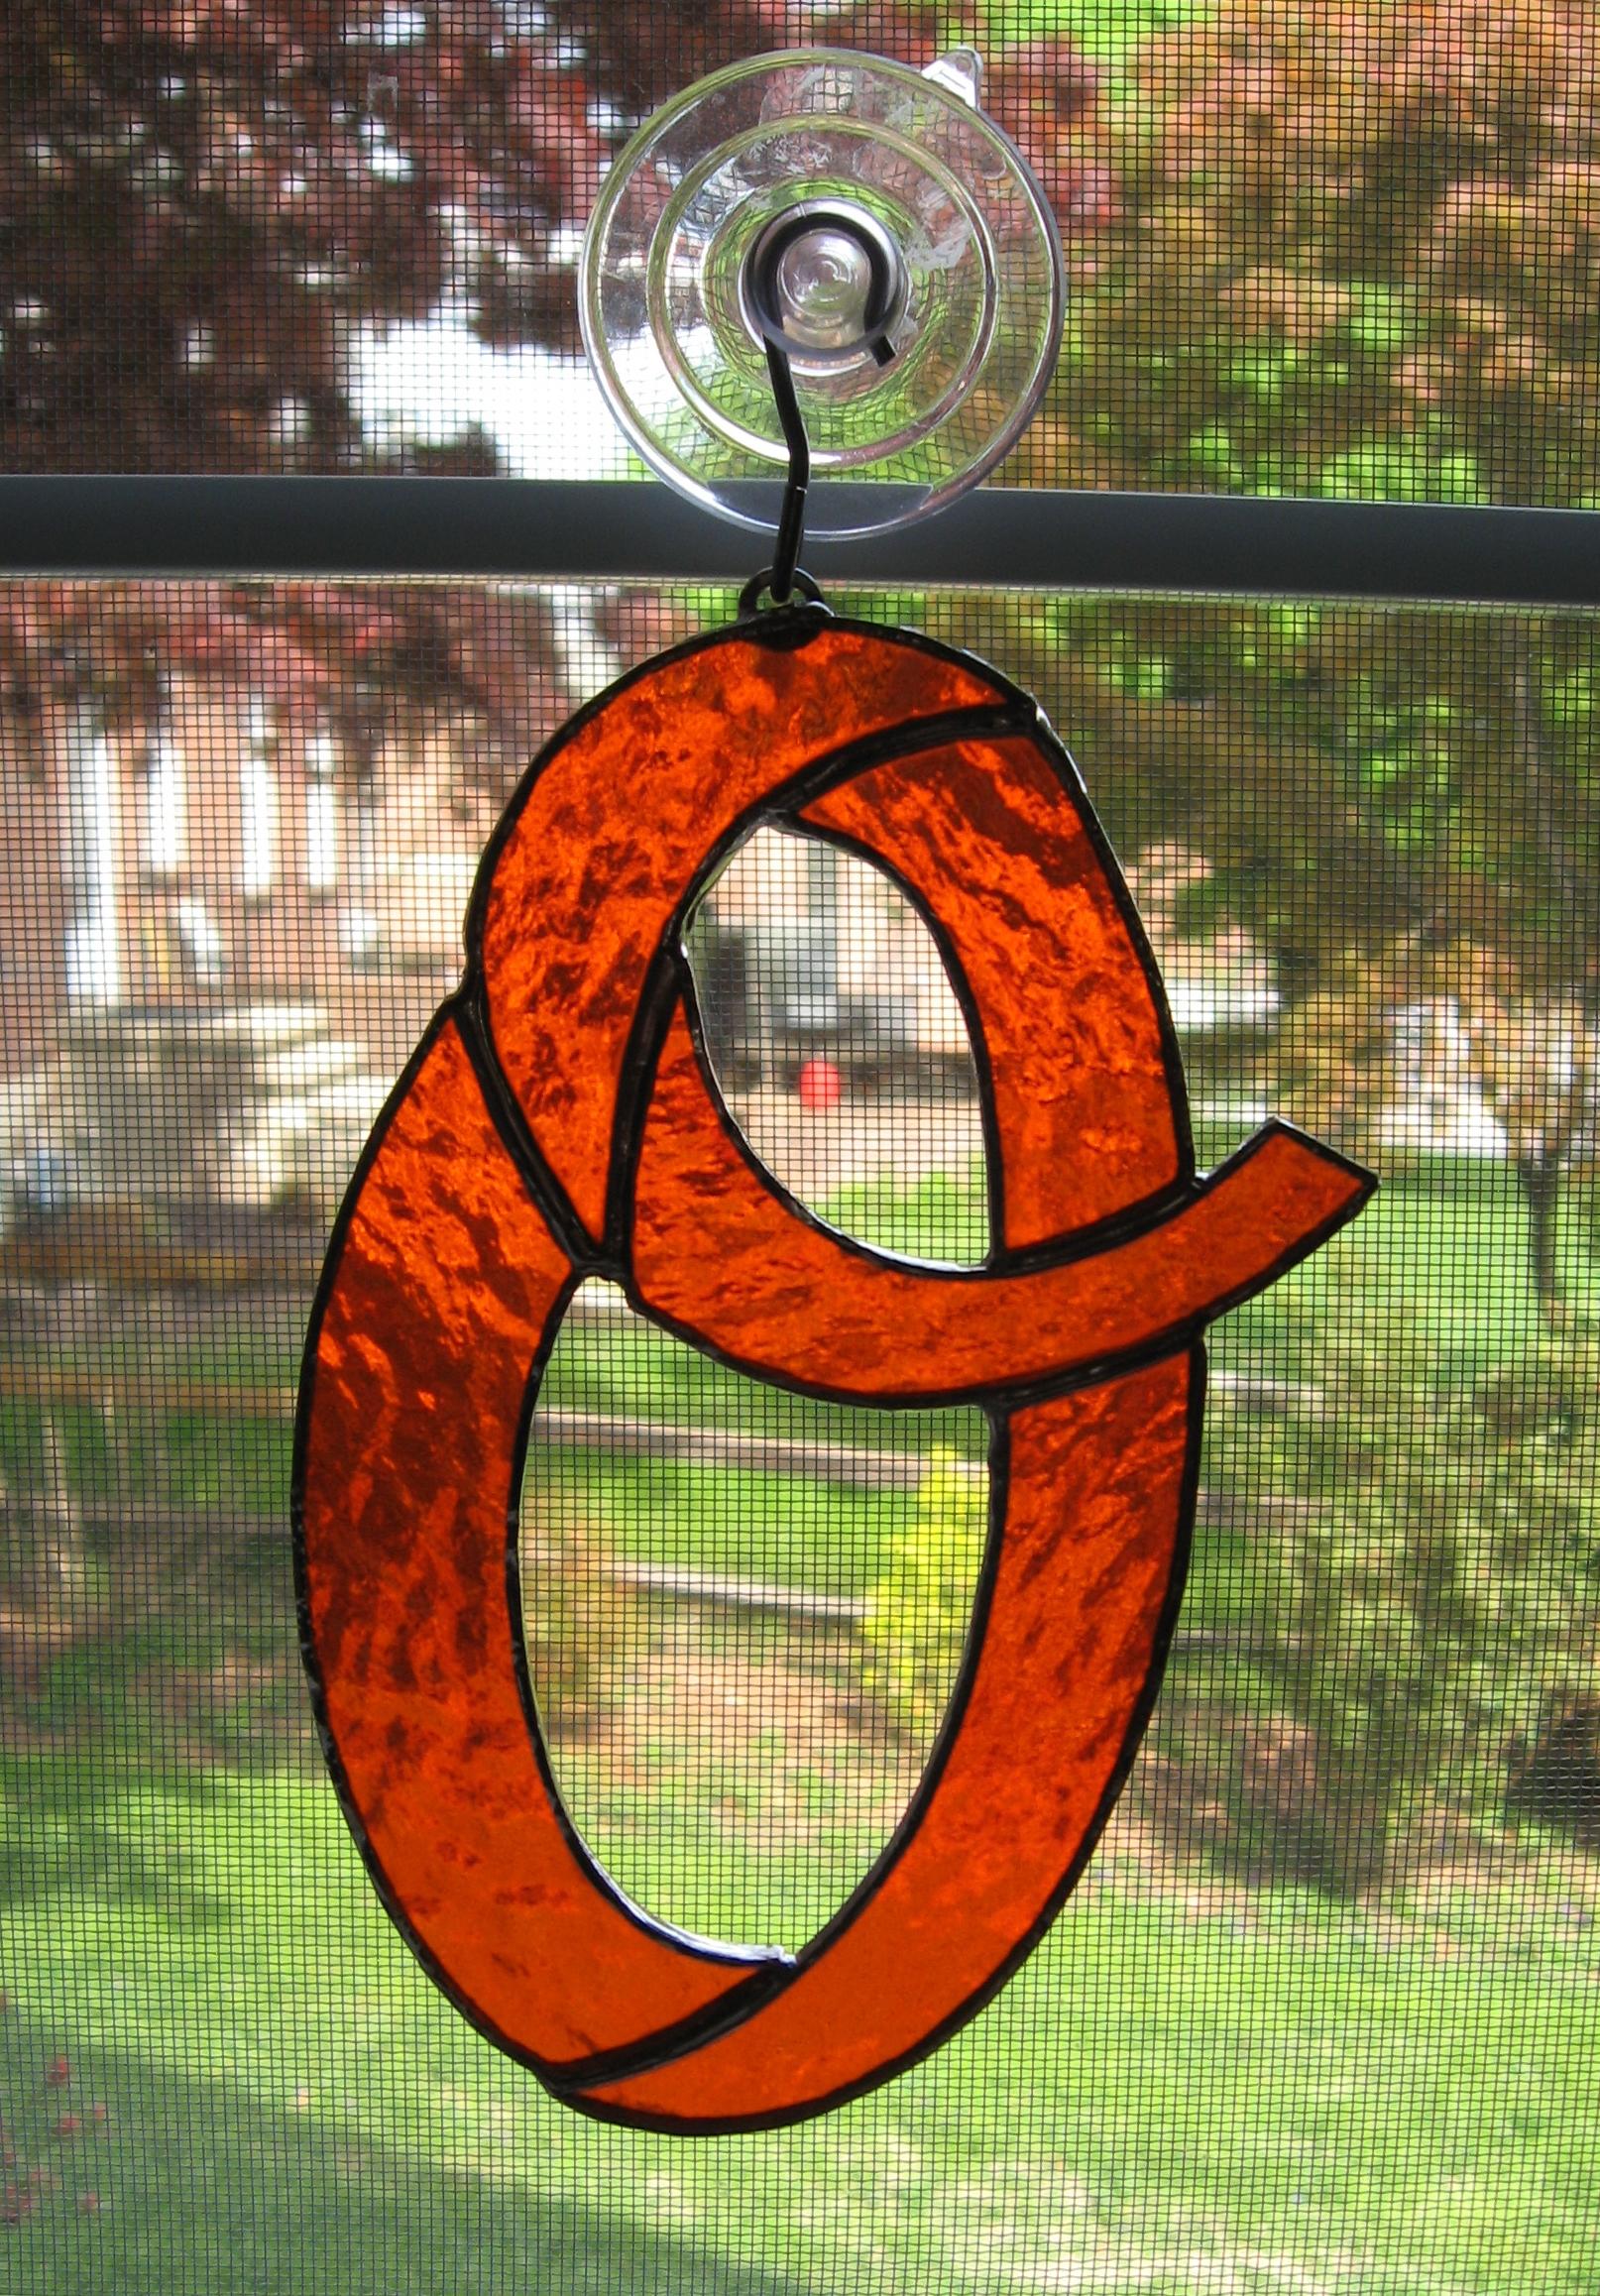 Baltimore Orioles "O" Stained Glass Suncatcher